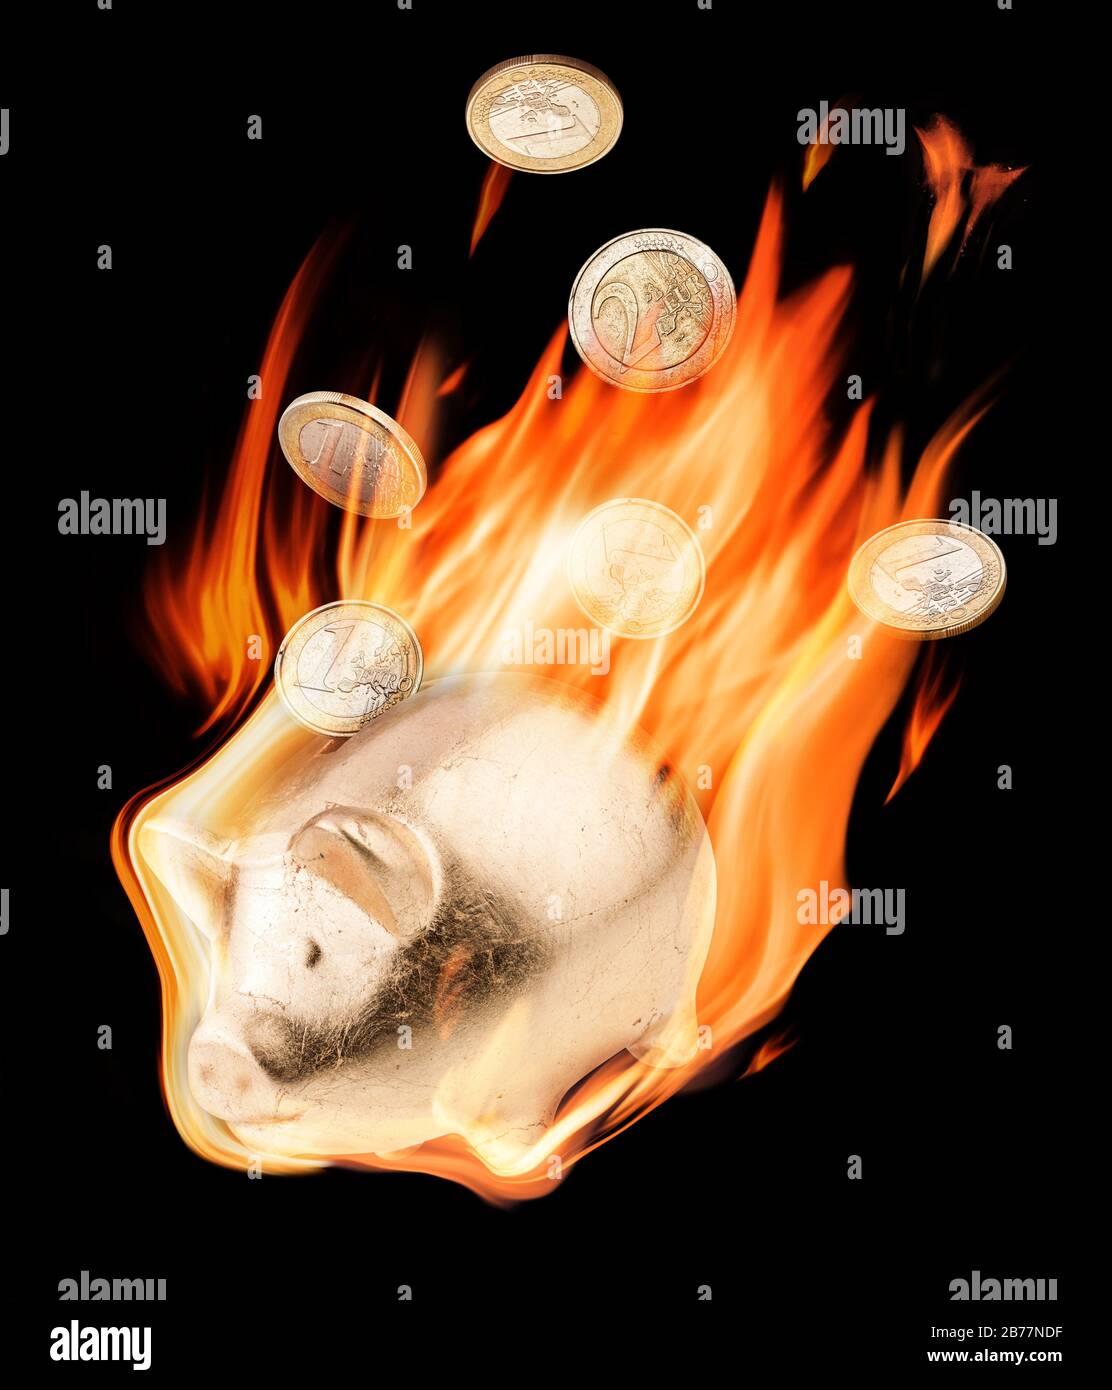 Burning money box and euro coins in flames on the black background. Conceptual photo. Stock Photo